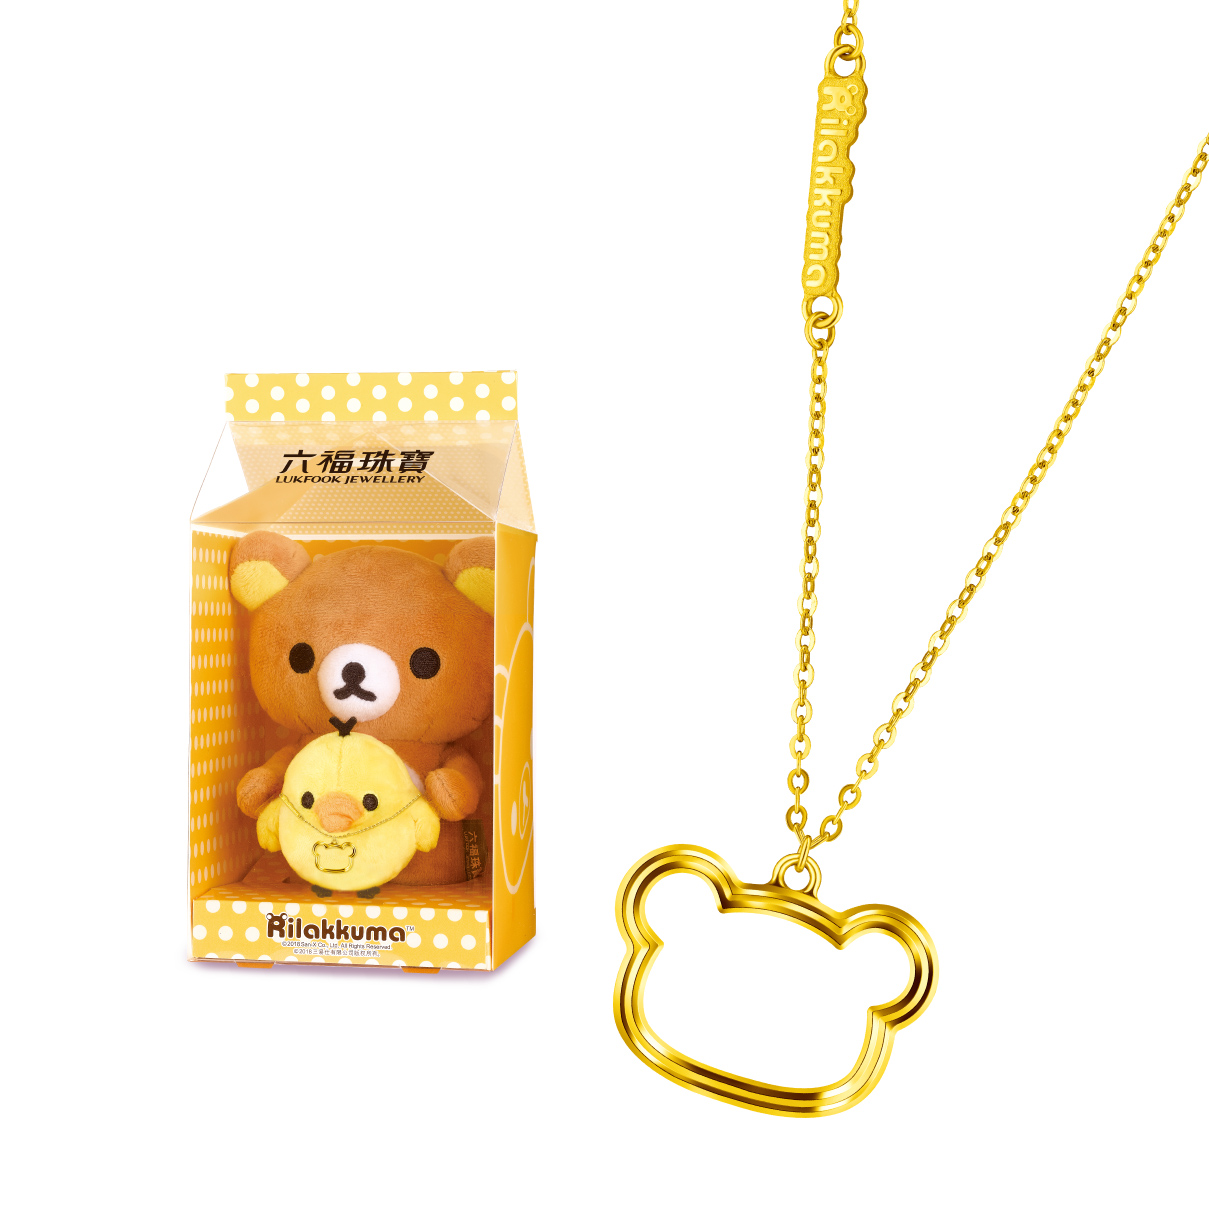 Rilakkuma™ Collection Light of Gold Necklace with Cashbox Gift Set